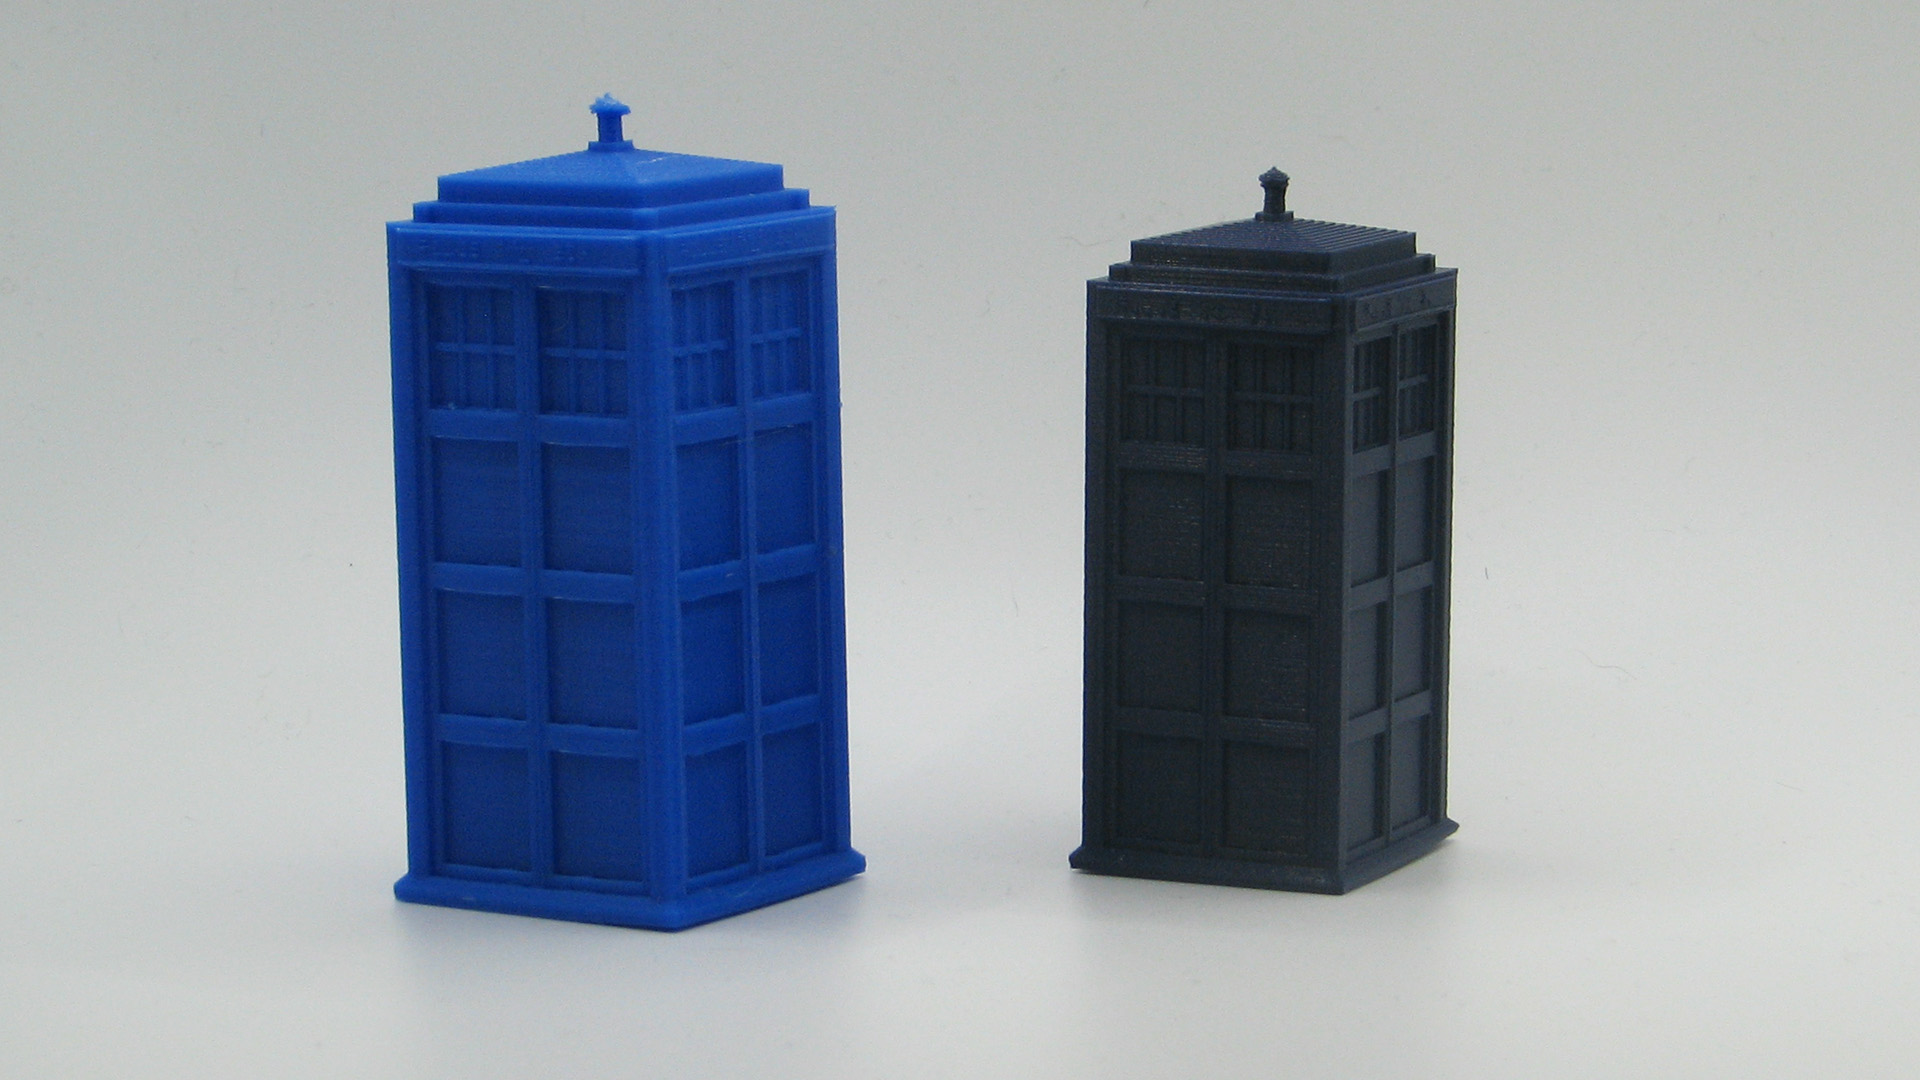 3D-printed TARDIS from Doctor Who